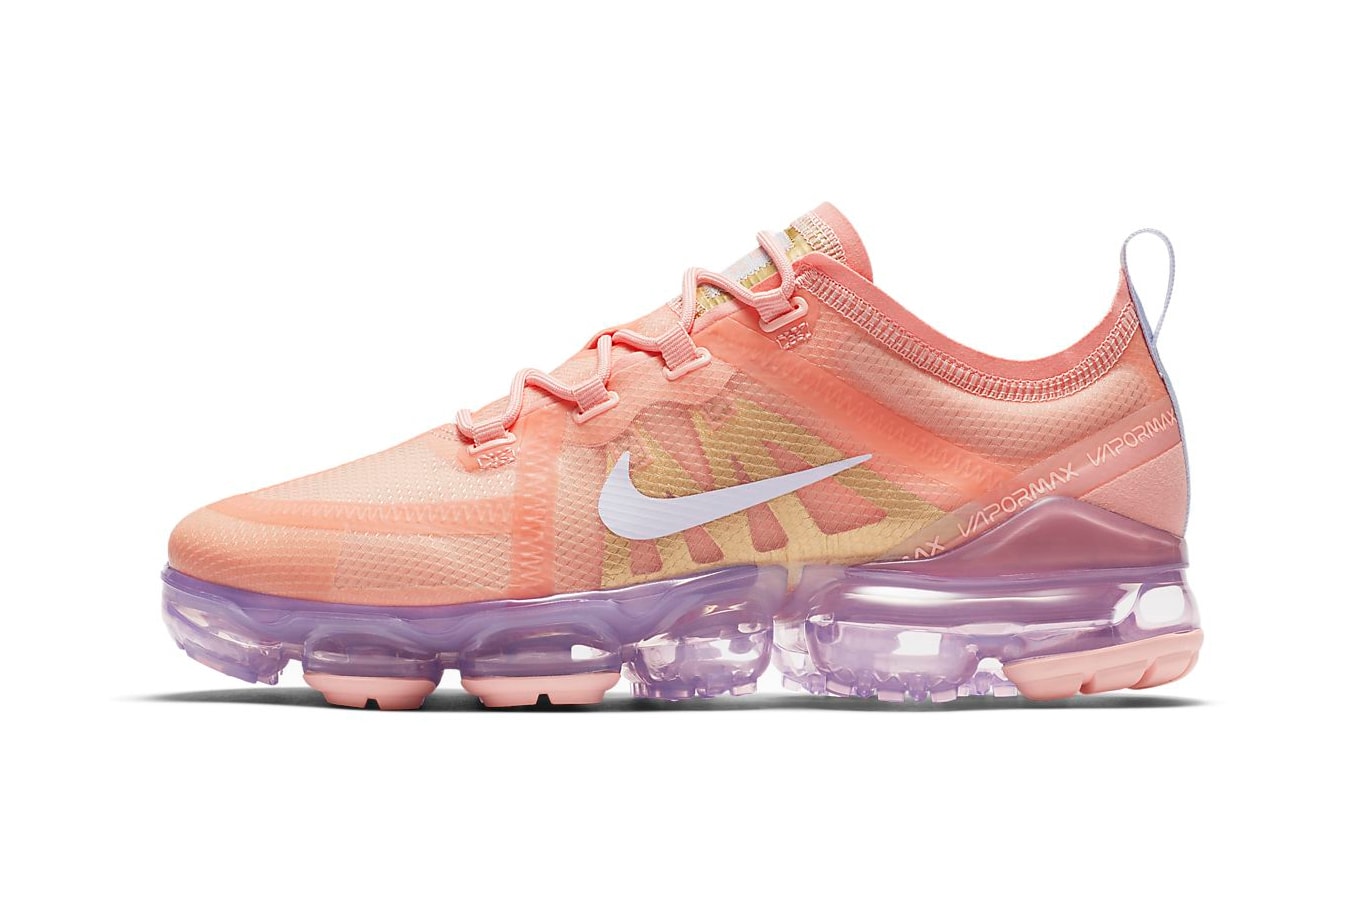 Nike Air VaporMax 2019 Bleached Coral Lilac Amethyst Tint Sneakers Trainers